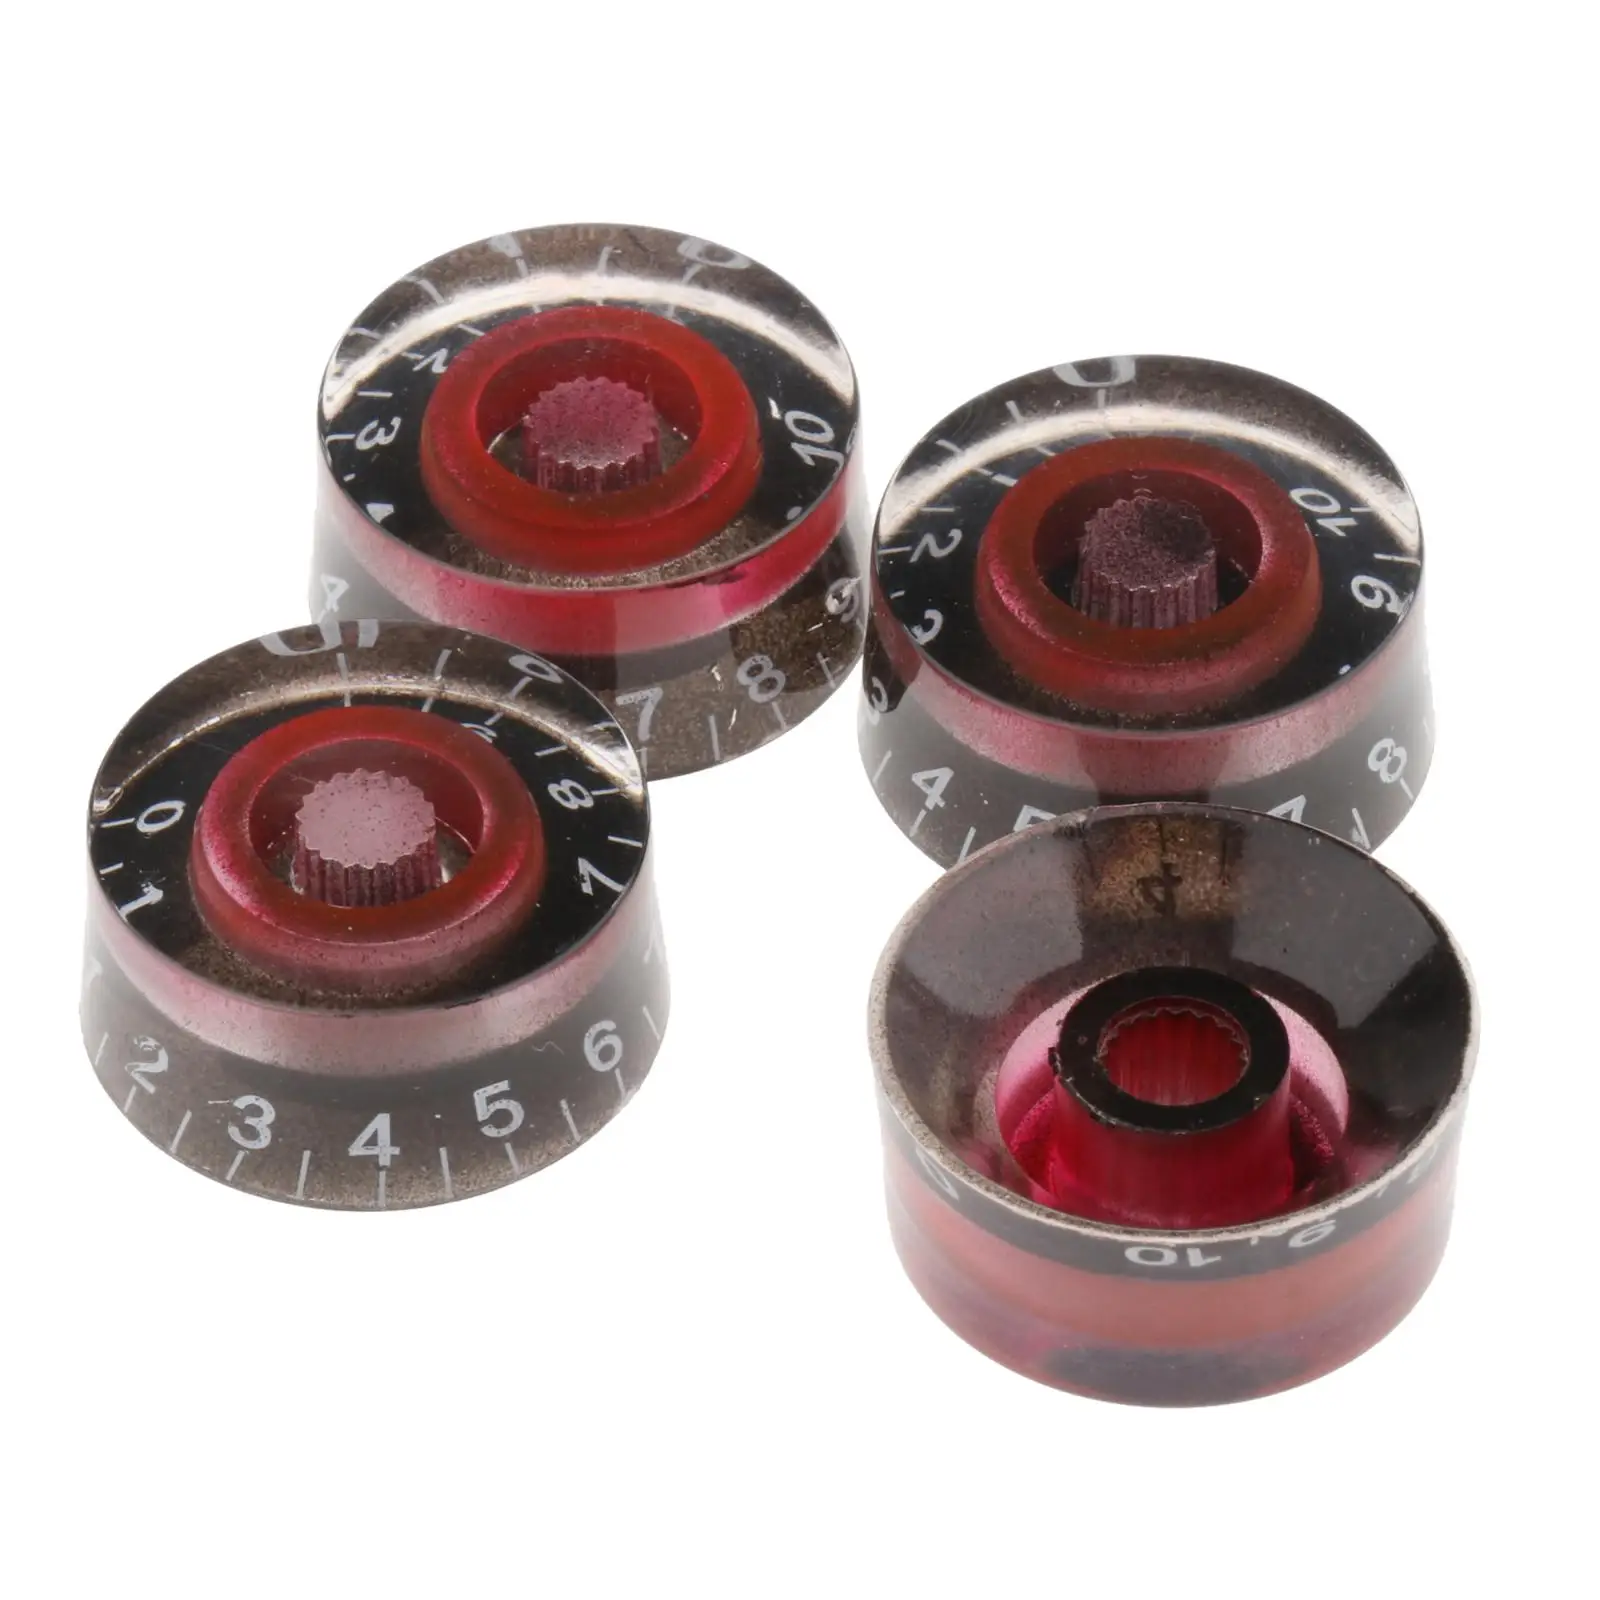 Resin Electric Guitar Tone and Volume Control Knobs w/ Number Top Hat for  Guitar Old Broken Part Accs